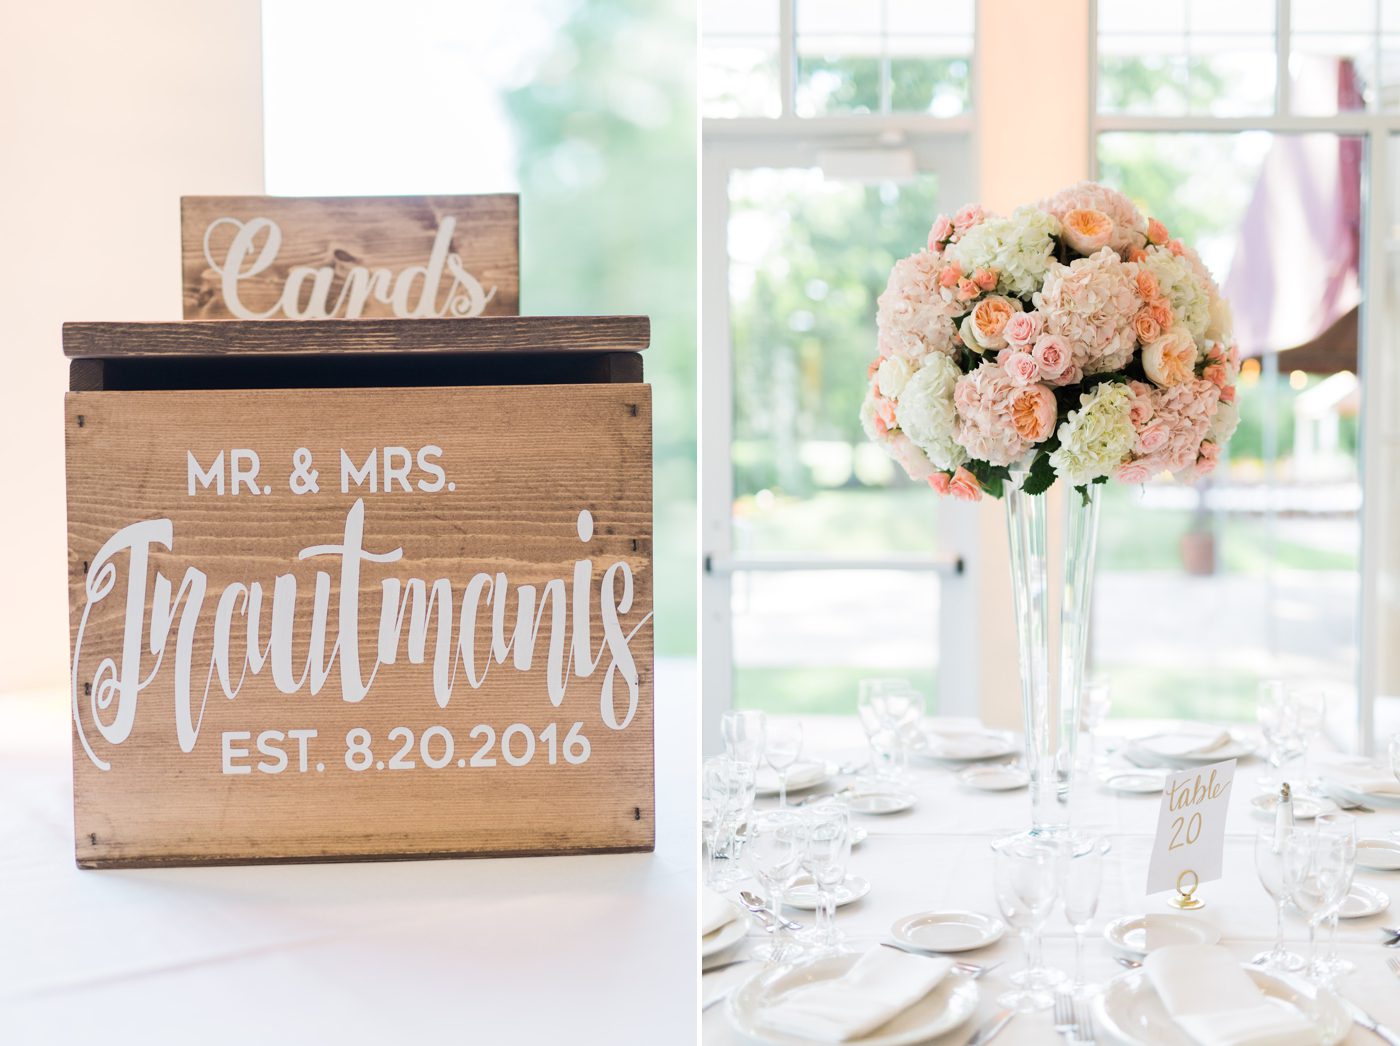 Customized cards box with newlyweds names and wedding date